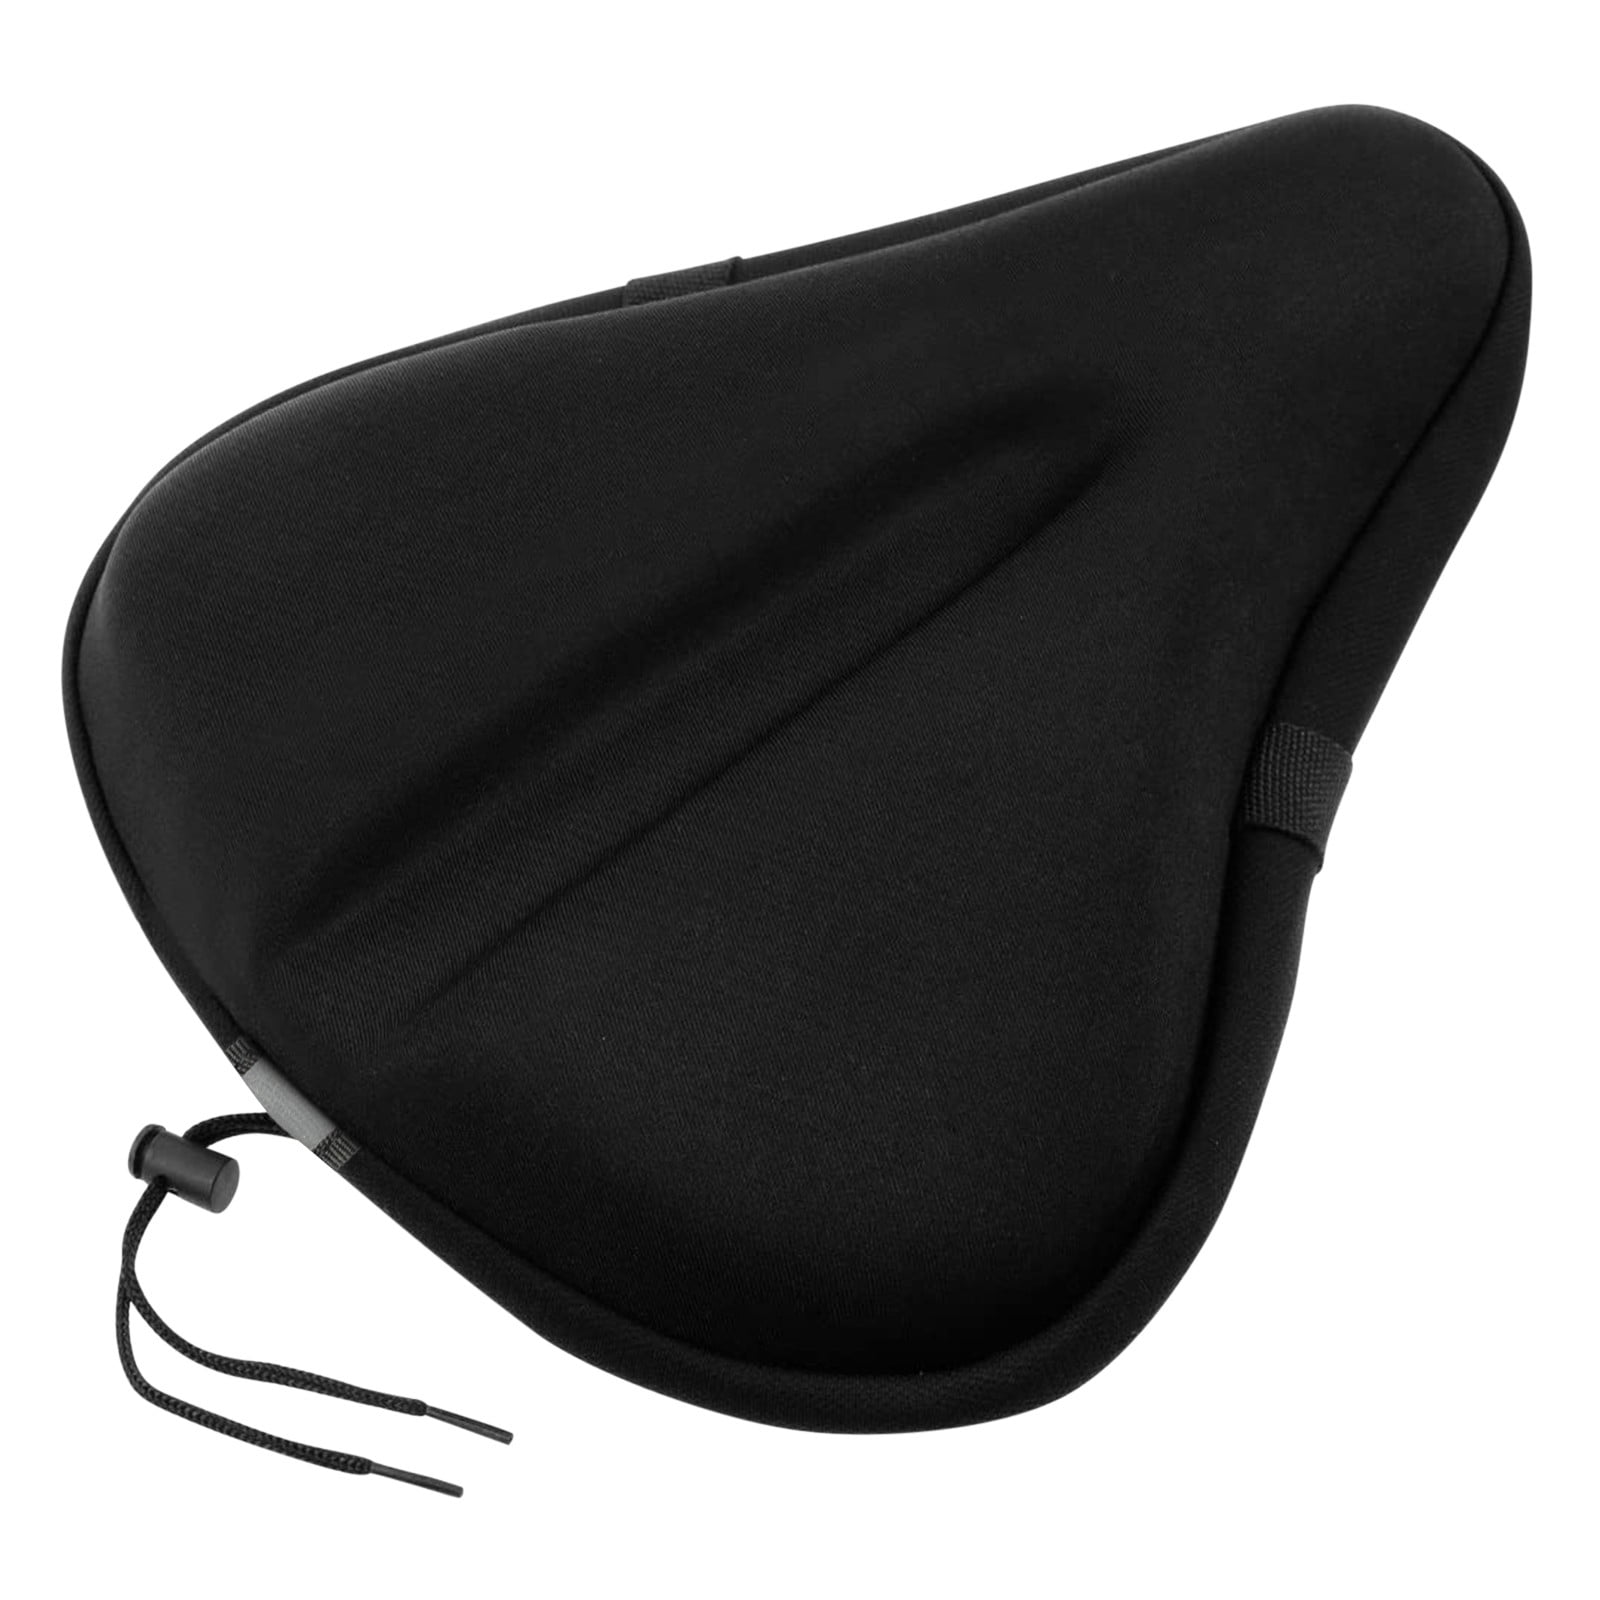 Details about   MTB Mountain Bike Cycling Comfort Soft Pad Cushion Cover Bicycle Saddle Seat 